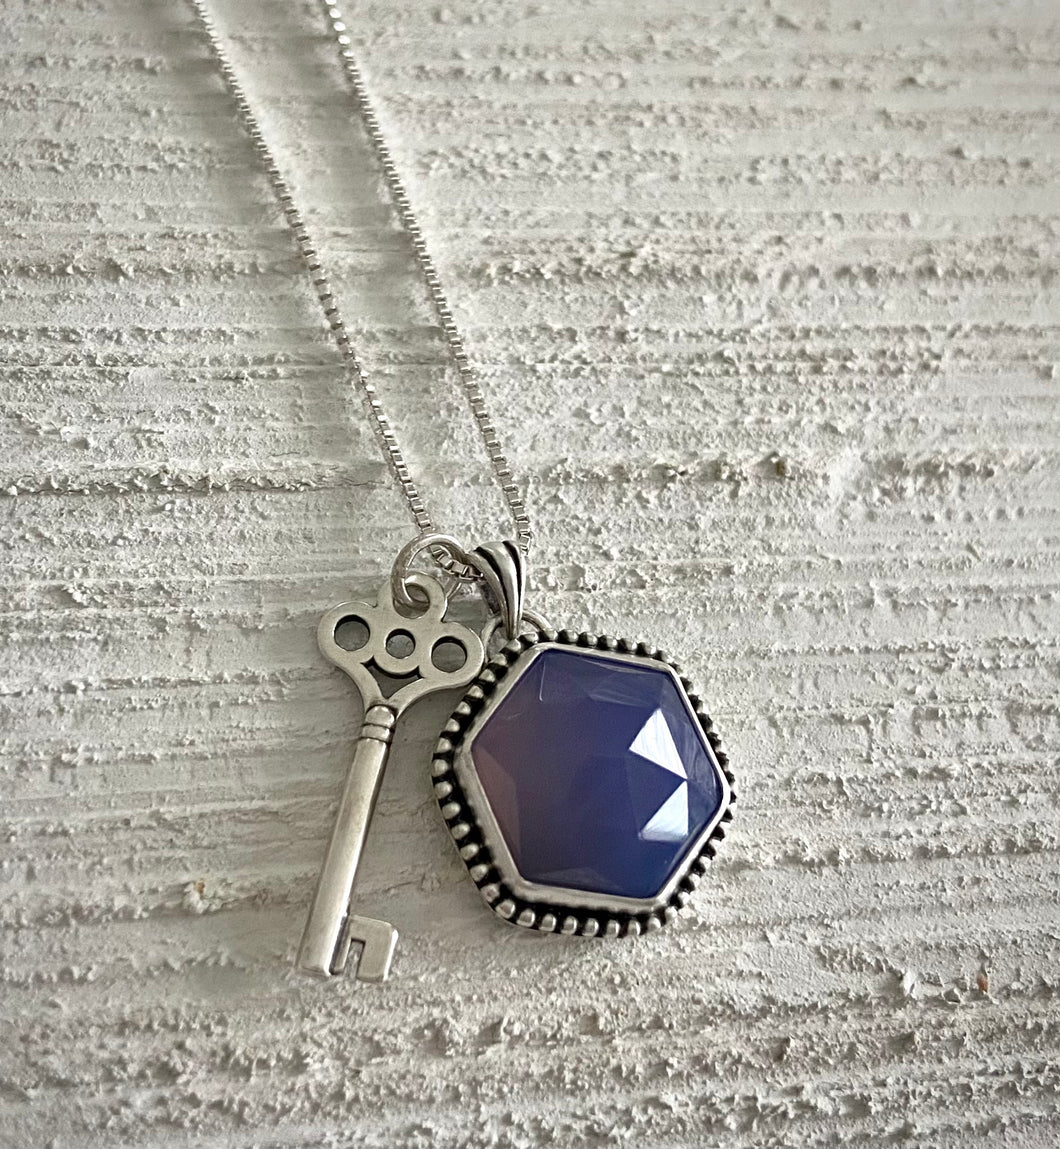 Key to My Heart Charm Necklace